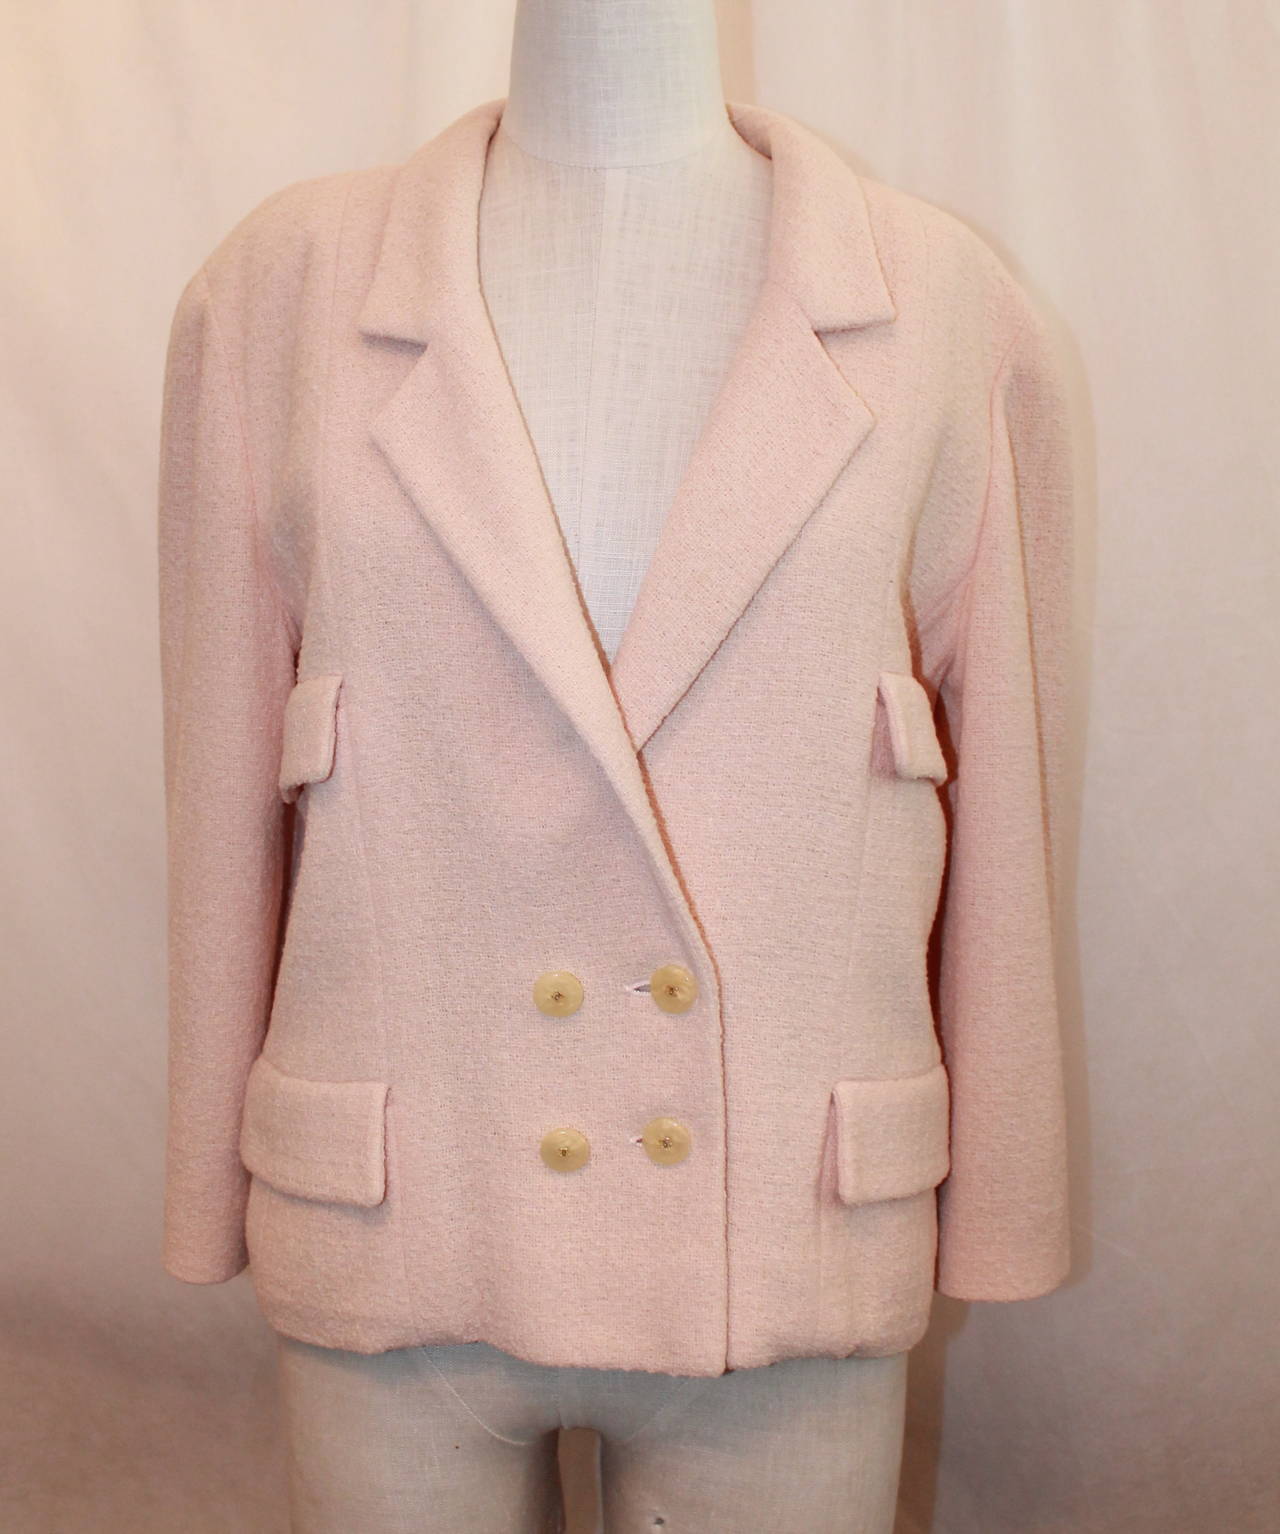 1999 Chanel Peach Double Breasted Jacket with Four Pockets and Pearly Chanel Buttons. Size 40.

Fabric:
85 % Wool
15 % Nylon
Lining:
100 % Silk

Measurements:
Bust: 36 